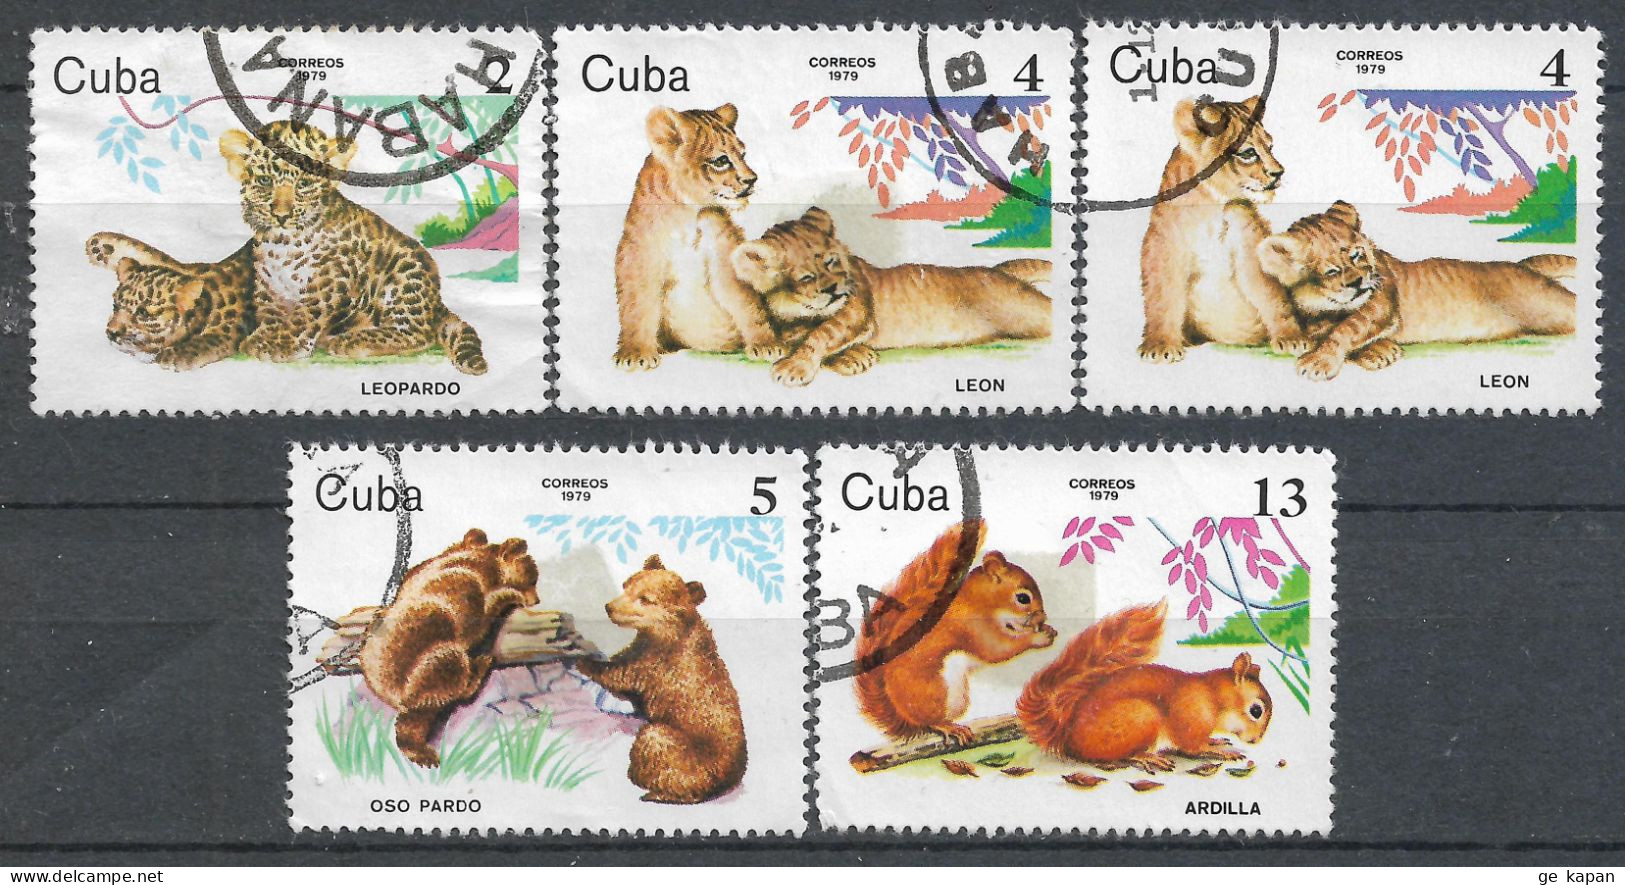 1979 CUBA Set Of 5 Used Stamps (Michel # 2440,2442-2444) CV €1.50 - Used Stamps